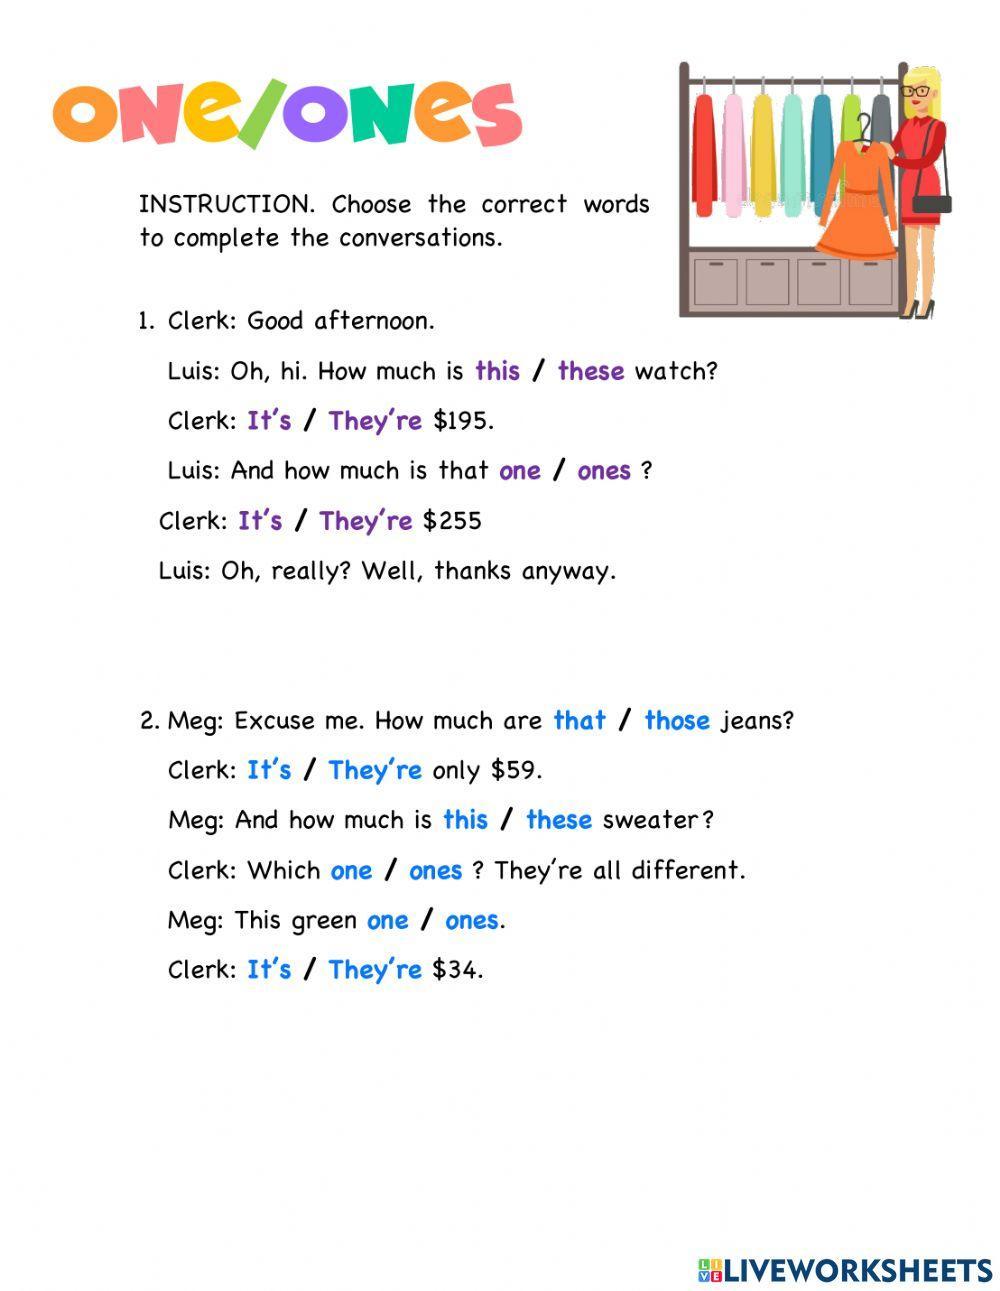 Demonstrative pronouns: one and ones